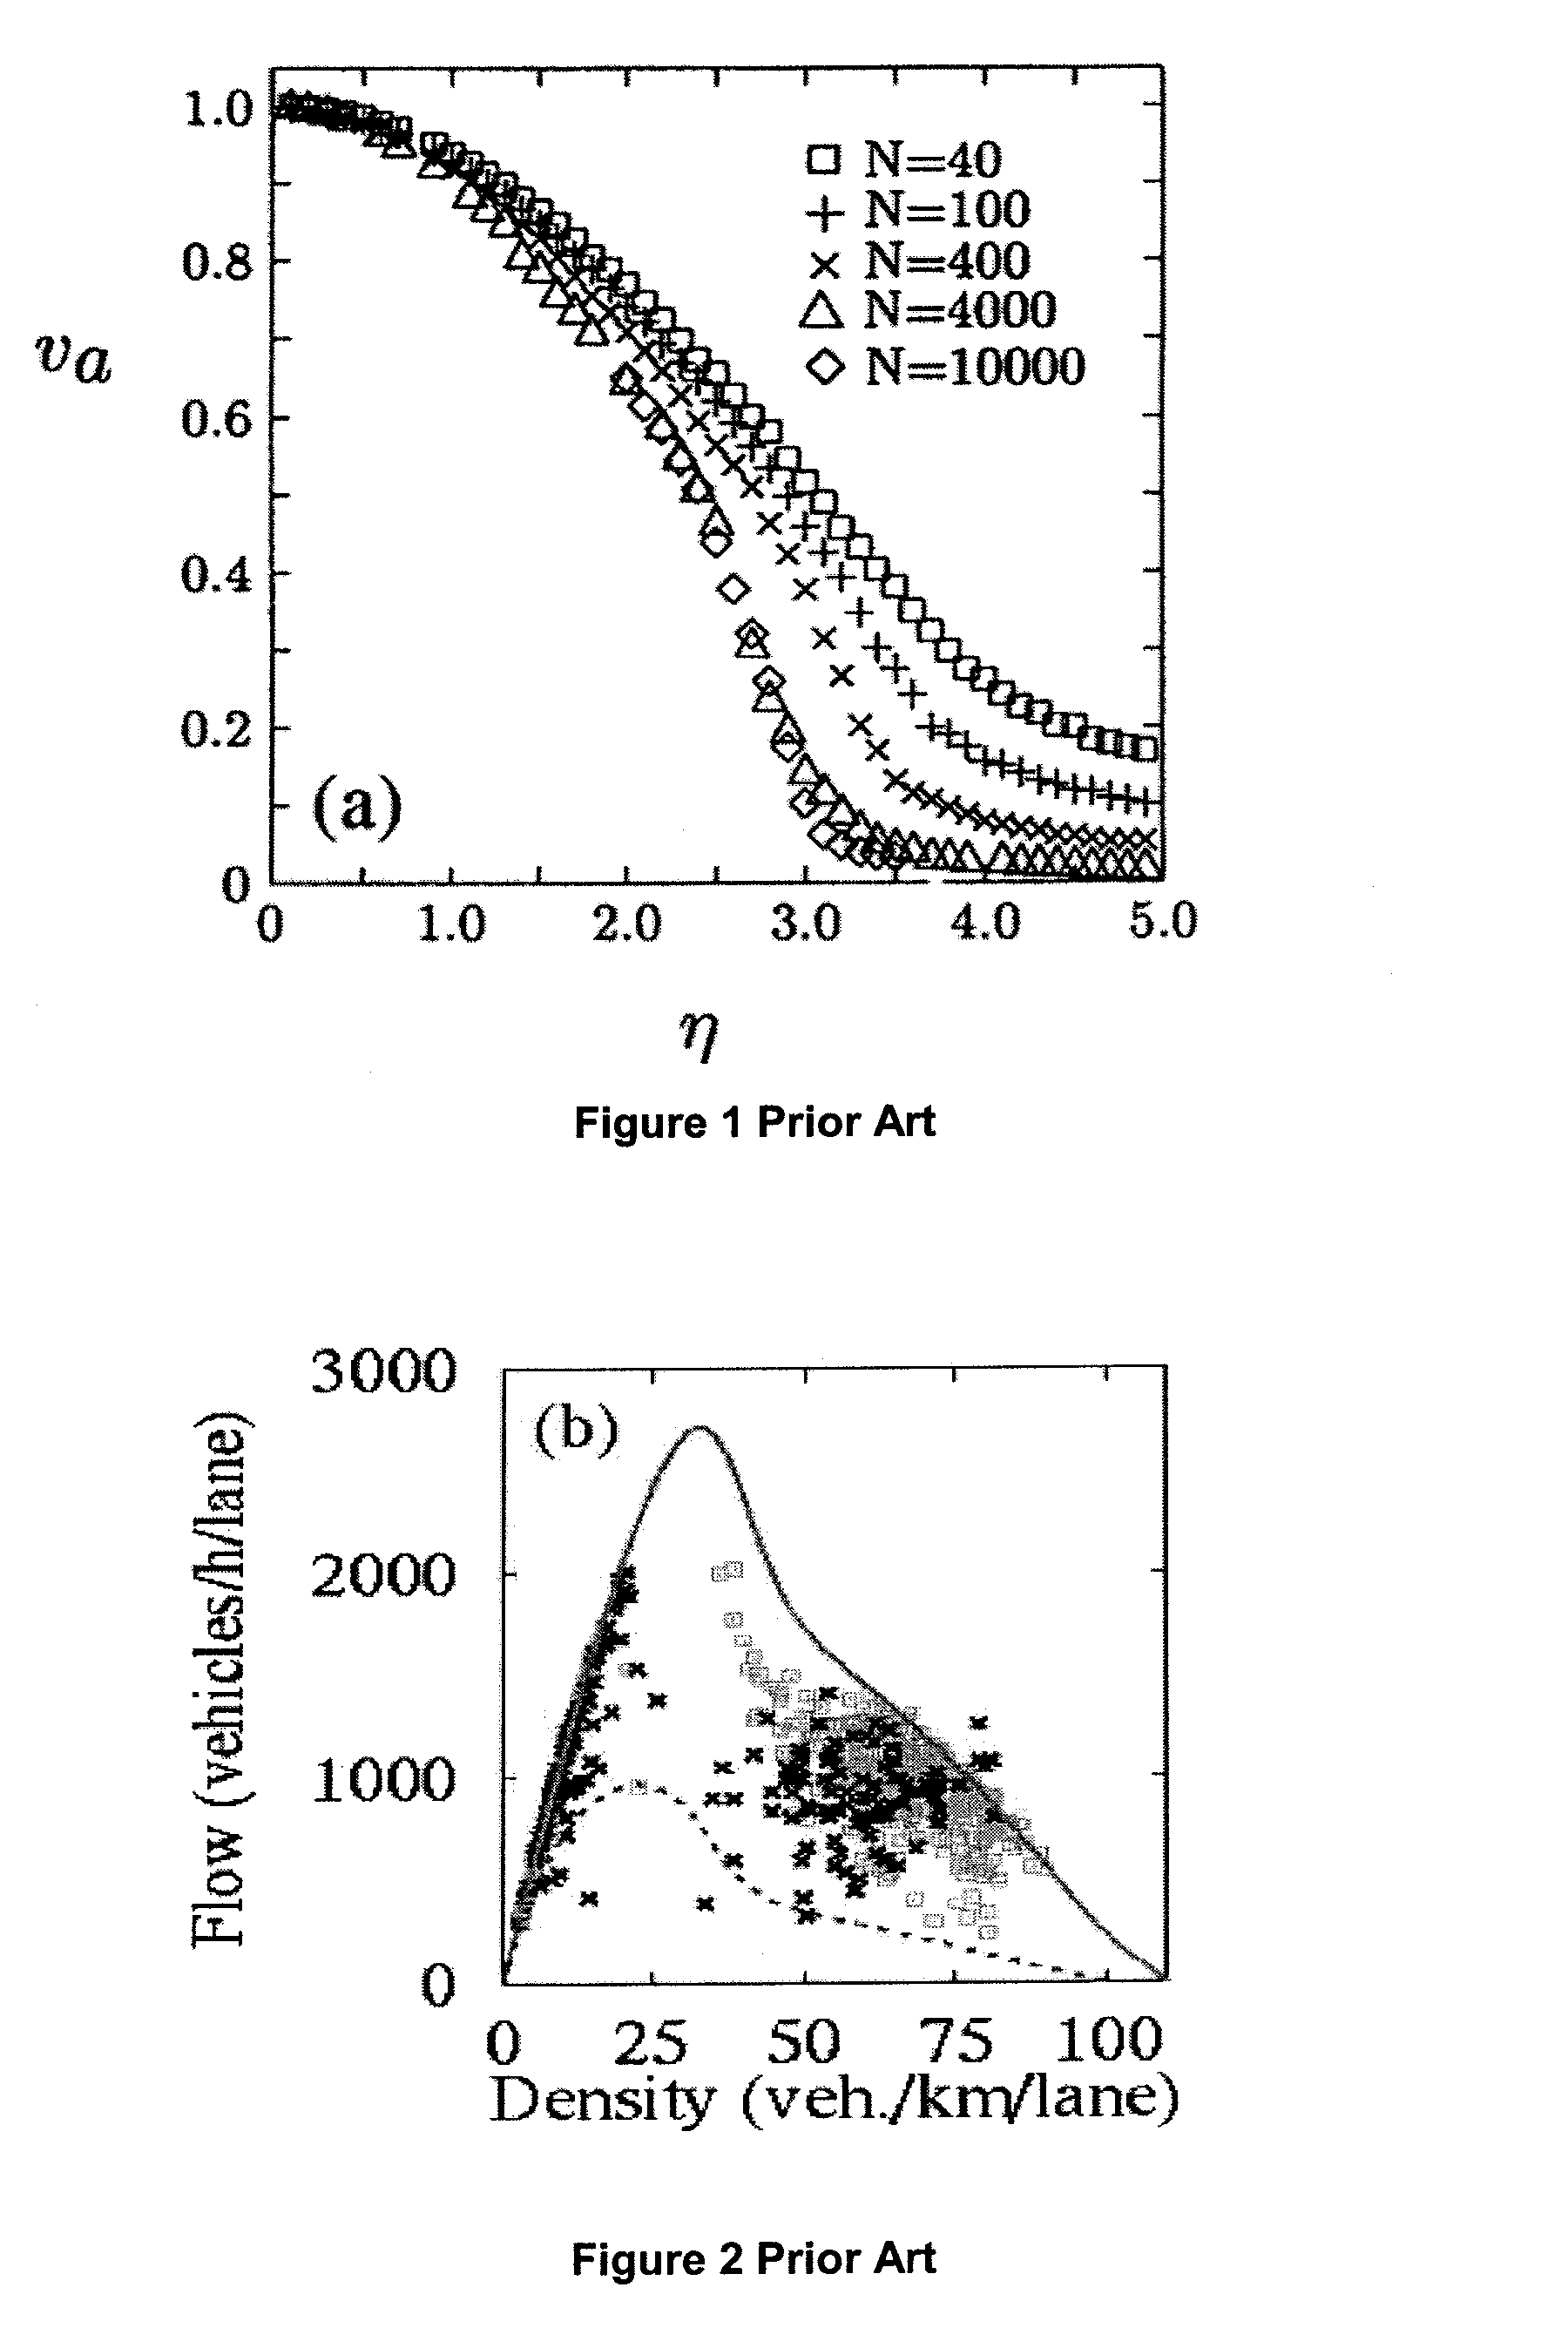 System and method for planning, disruption management, and optimization of networked, scheduled or on-demand air transport fleet trajectory operations